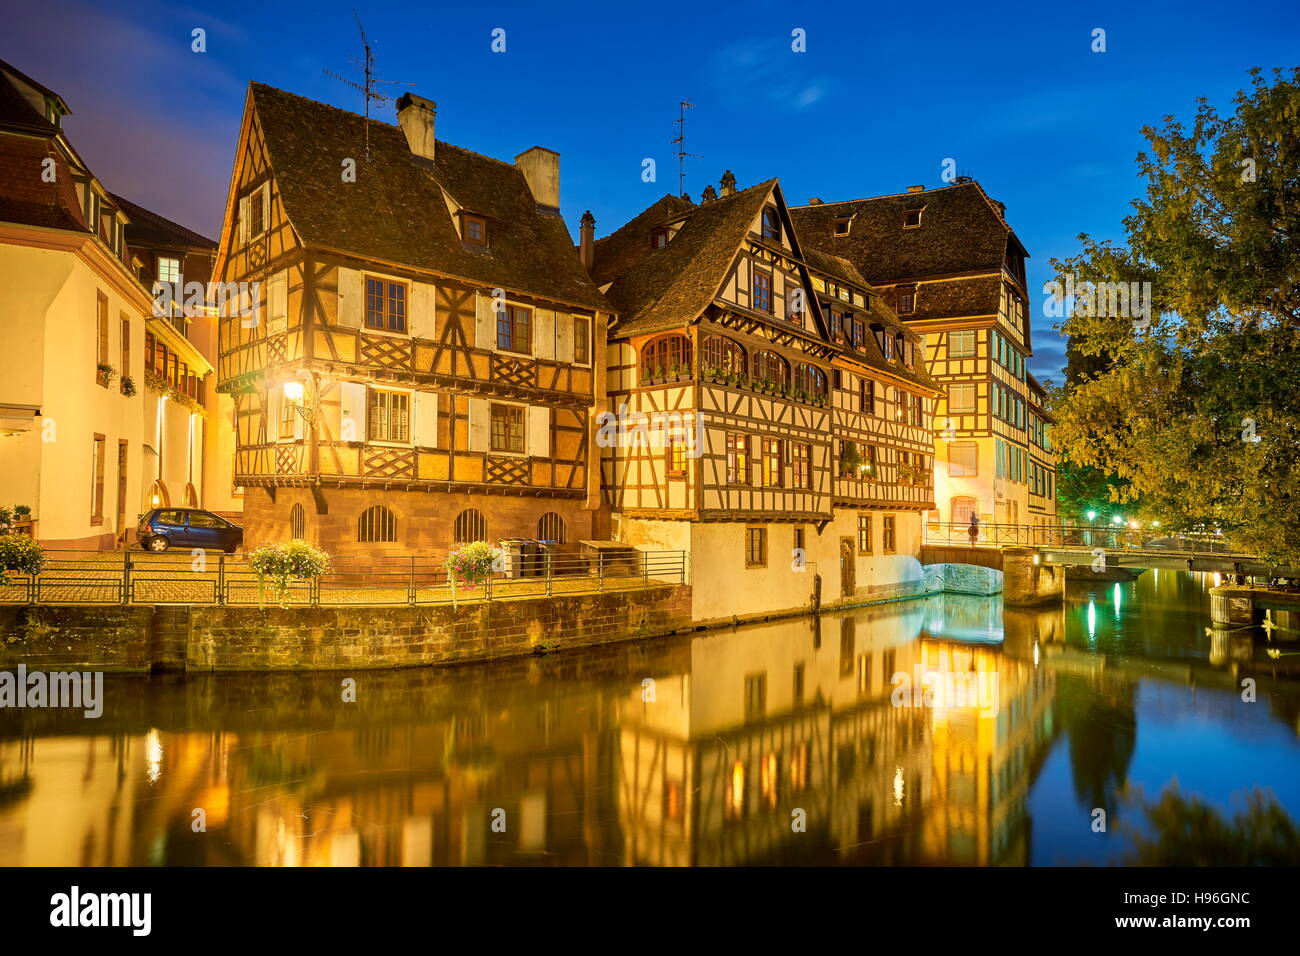 Old town district at evening, Strasbourg, France Stock Photo